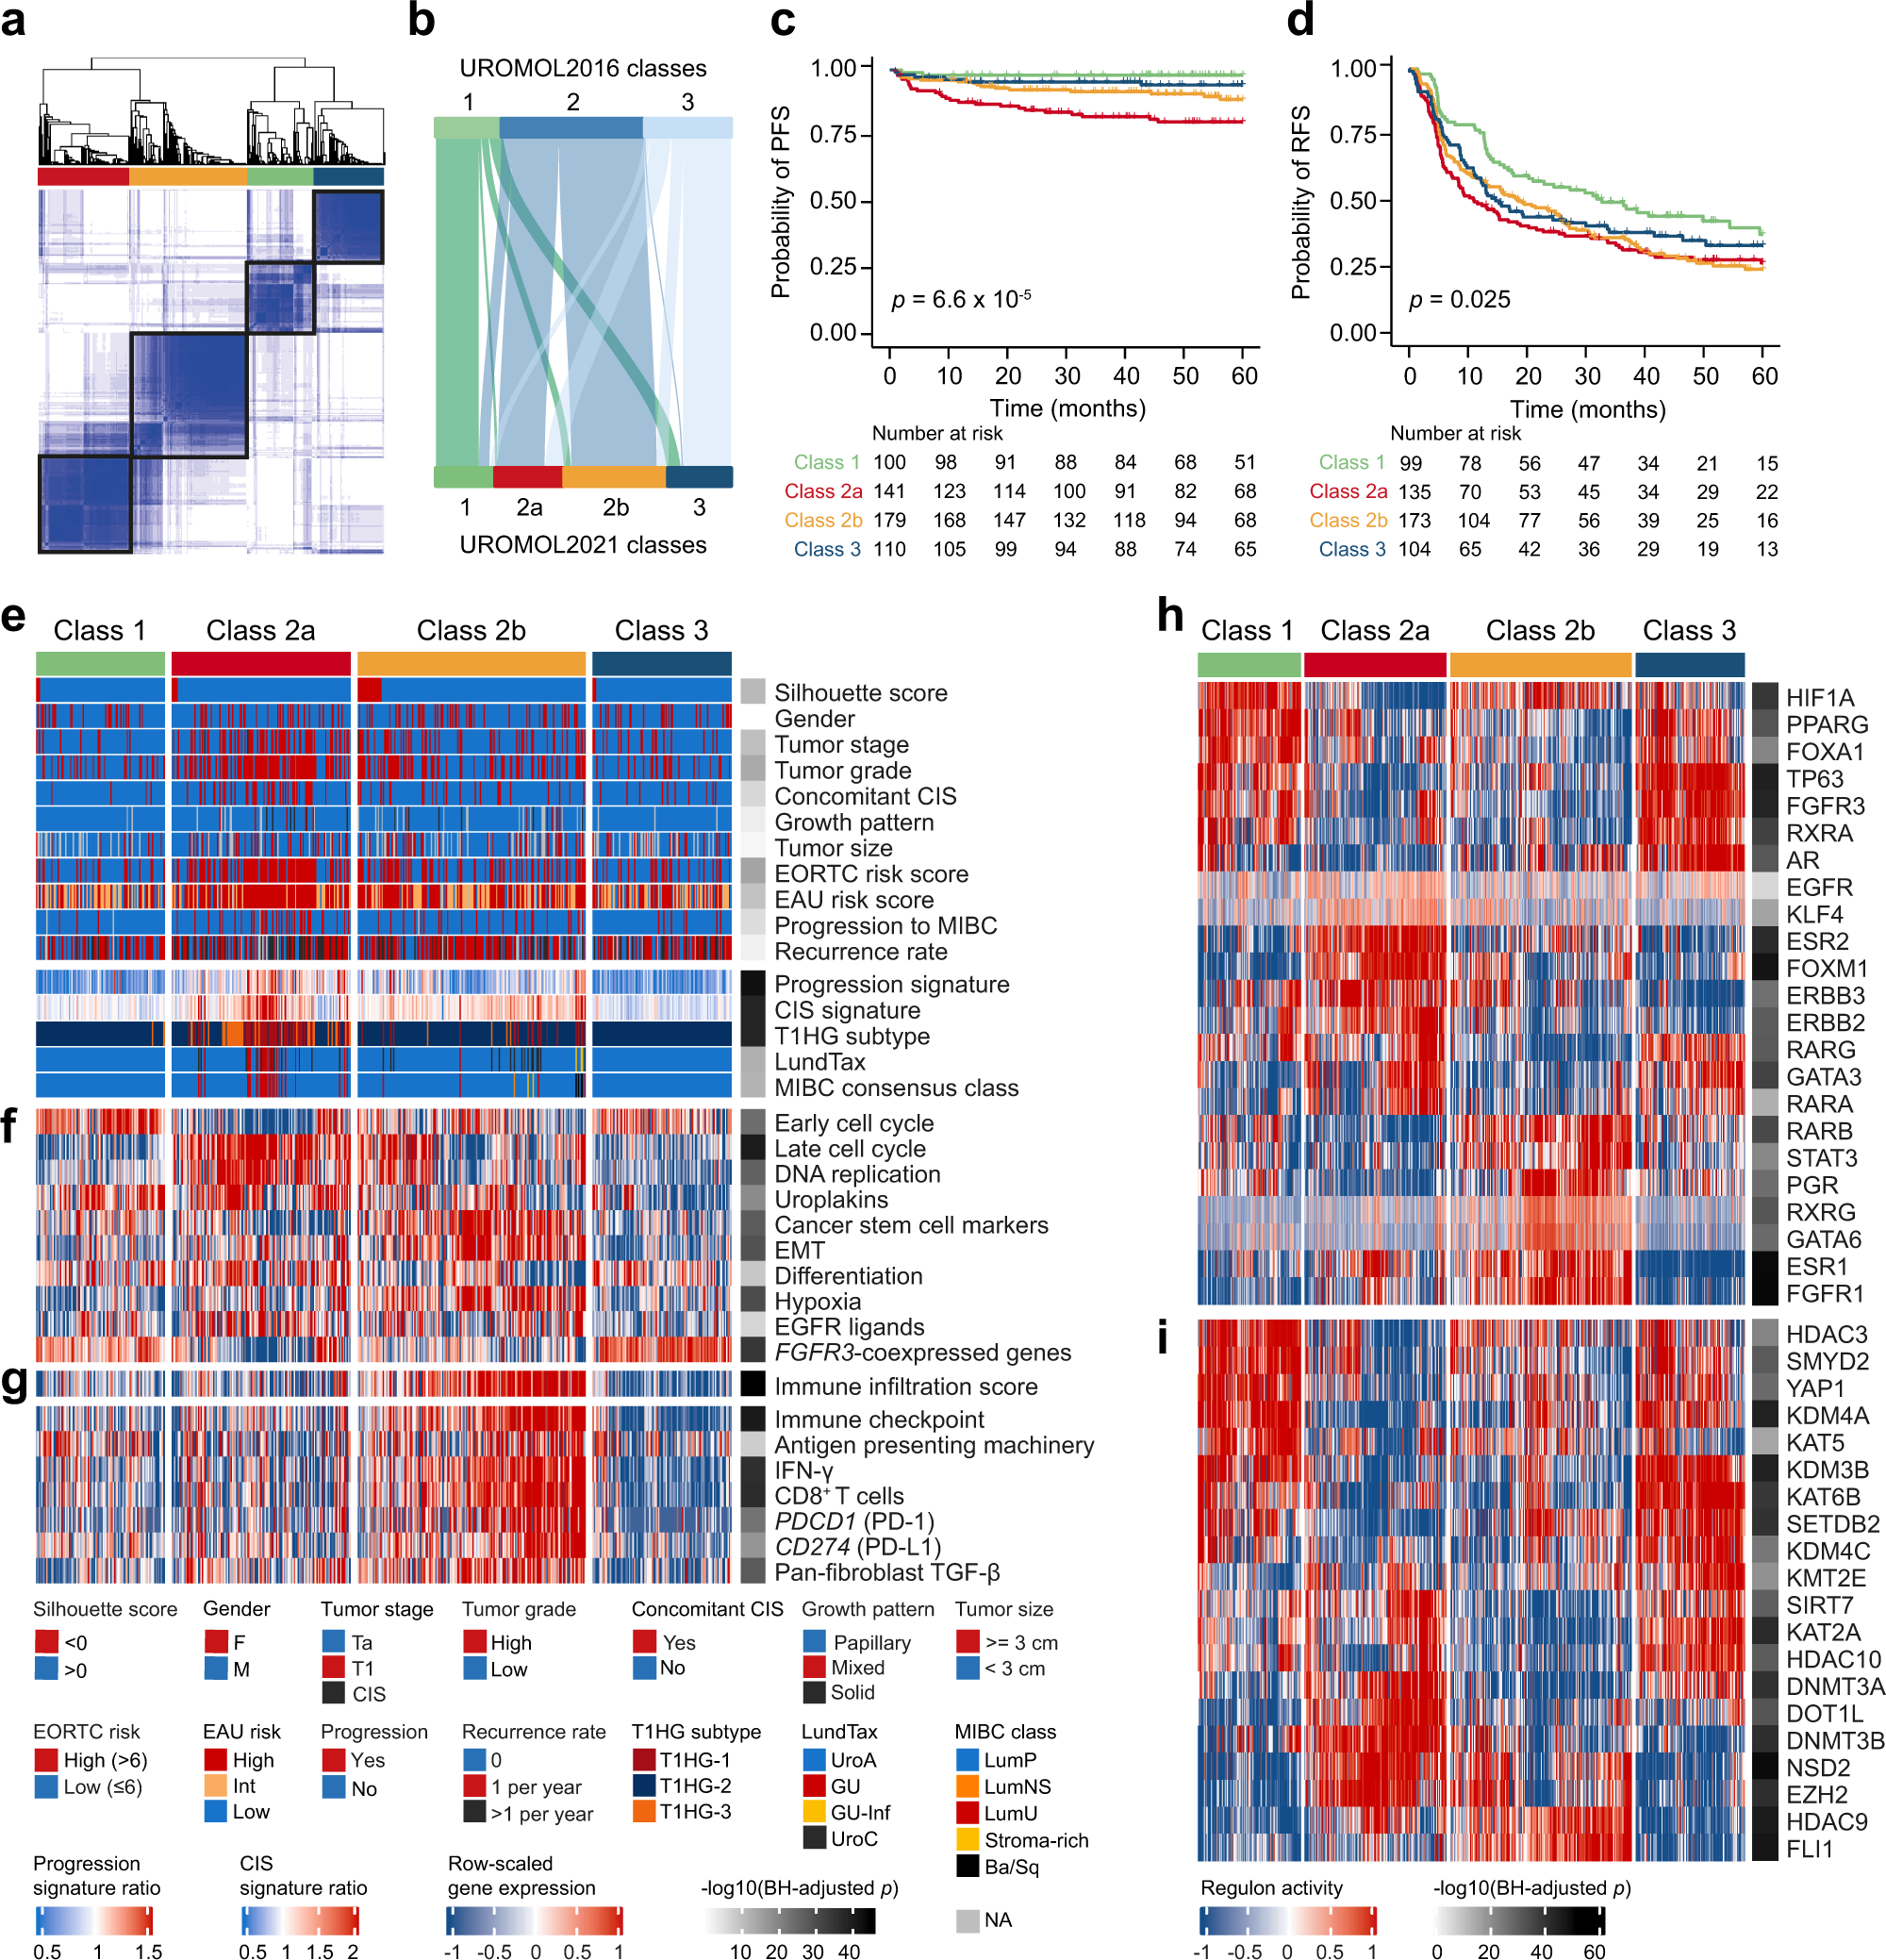 An integrated multi-omics analysis identifies prognostic molecular subtypes  of non-muscle-invasive bladder cancer | Nature Communications